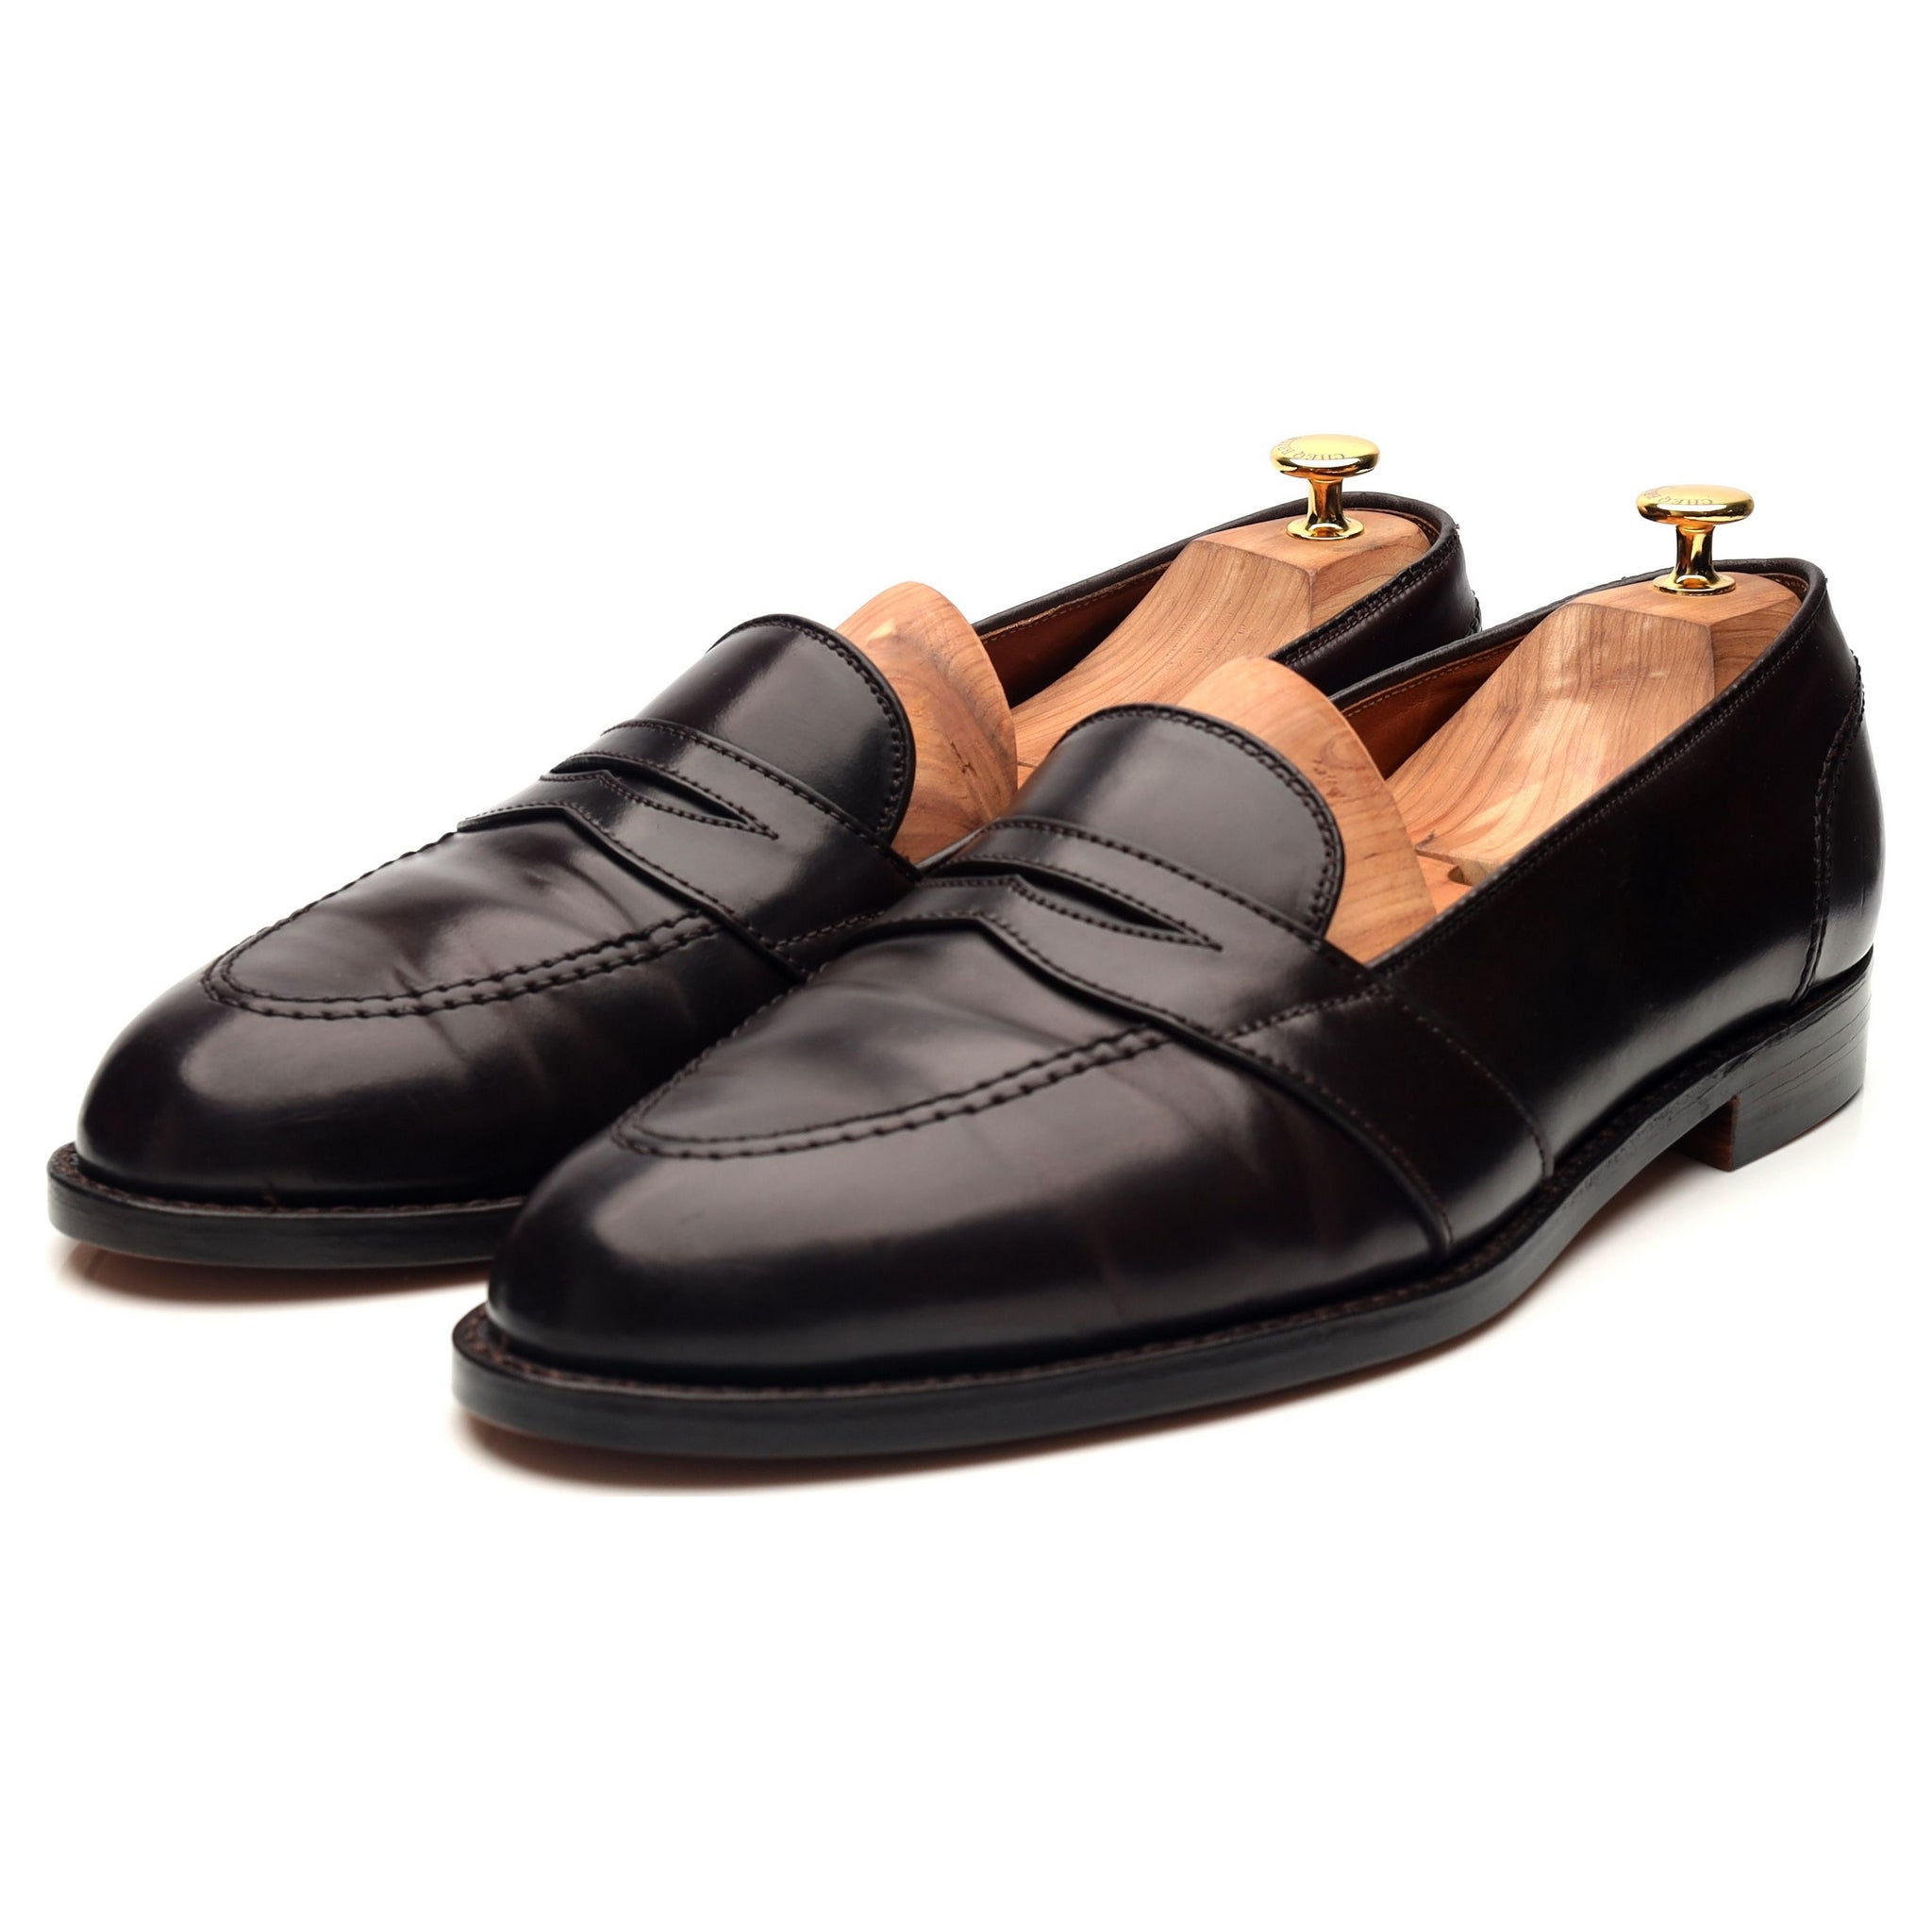 Patent Oxford Shoes Louis Vuitton - 38.5, buy pre-owned at 889 EUR